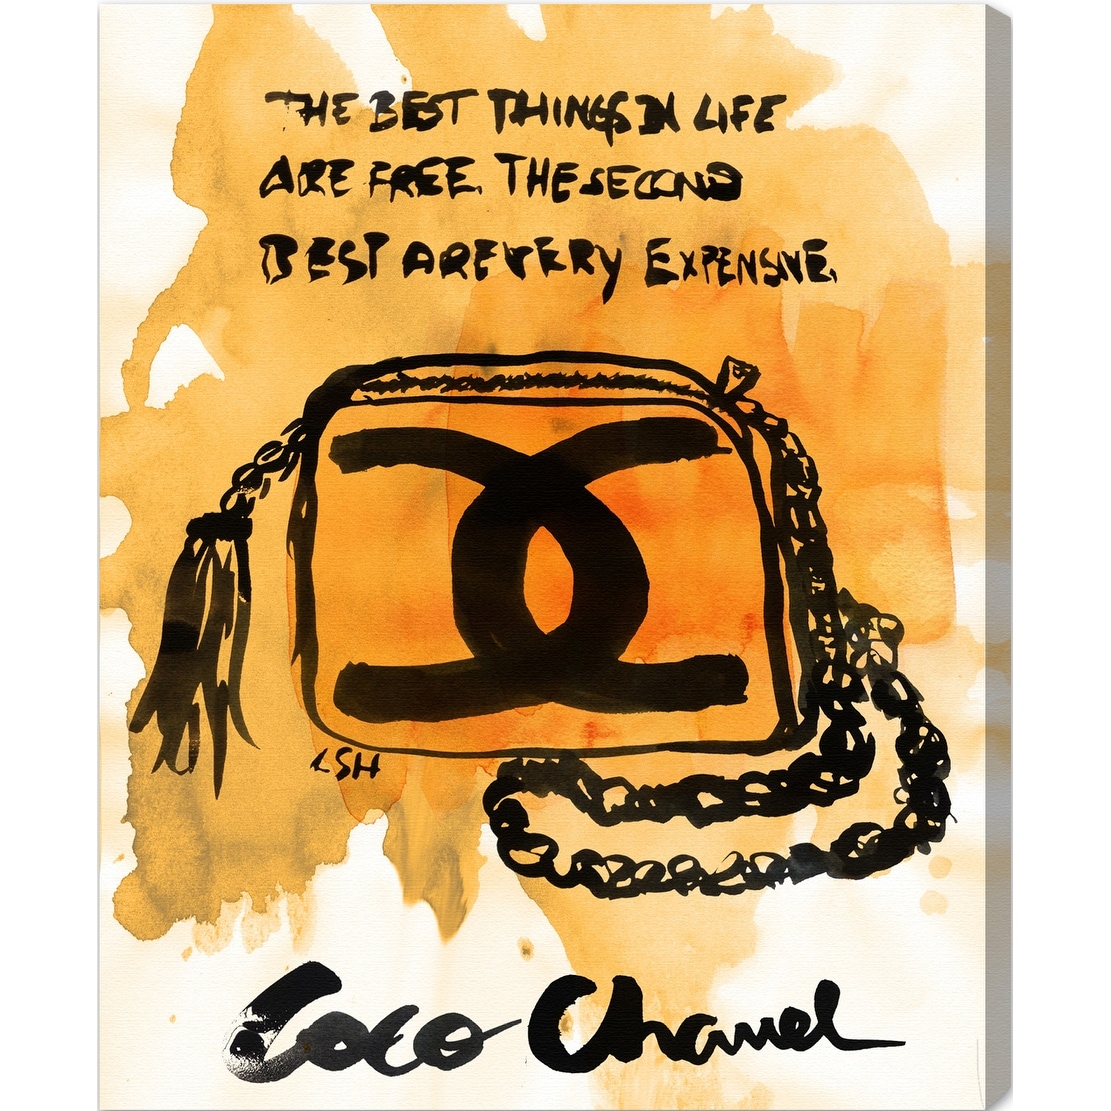 The Best Things In Life Are Free, The Second Best Are Very Expensive, Coco  Chanel Quote, Chanel Bedroom Print, Chanel Wall Art, Bedroom Sign